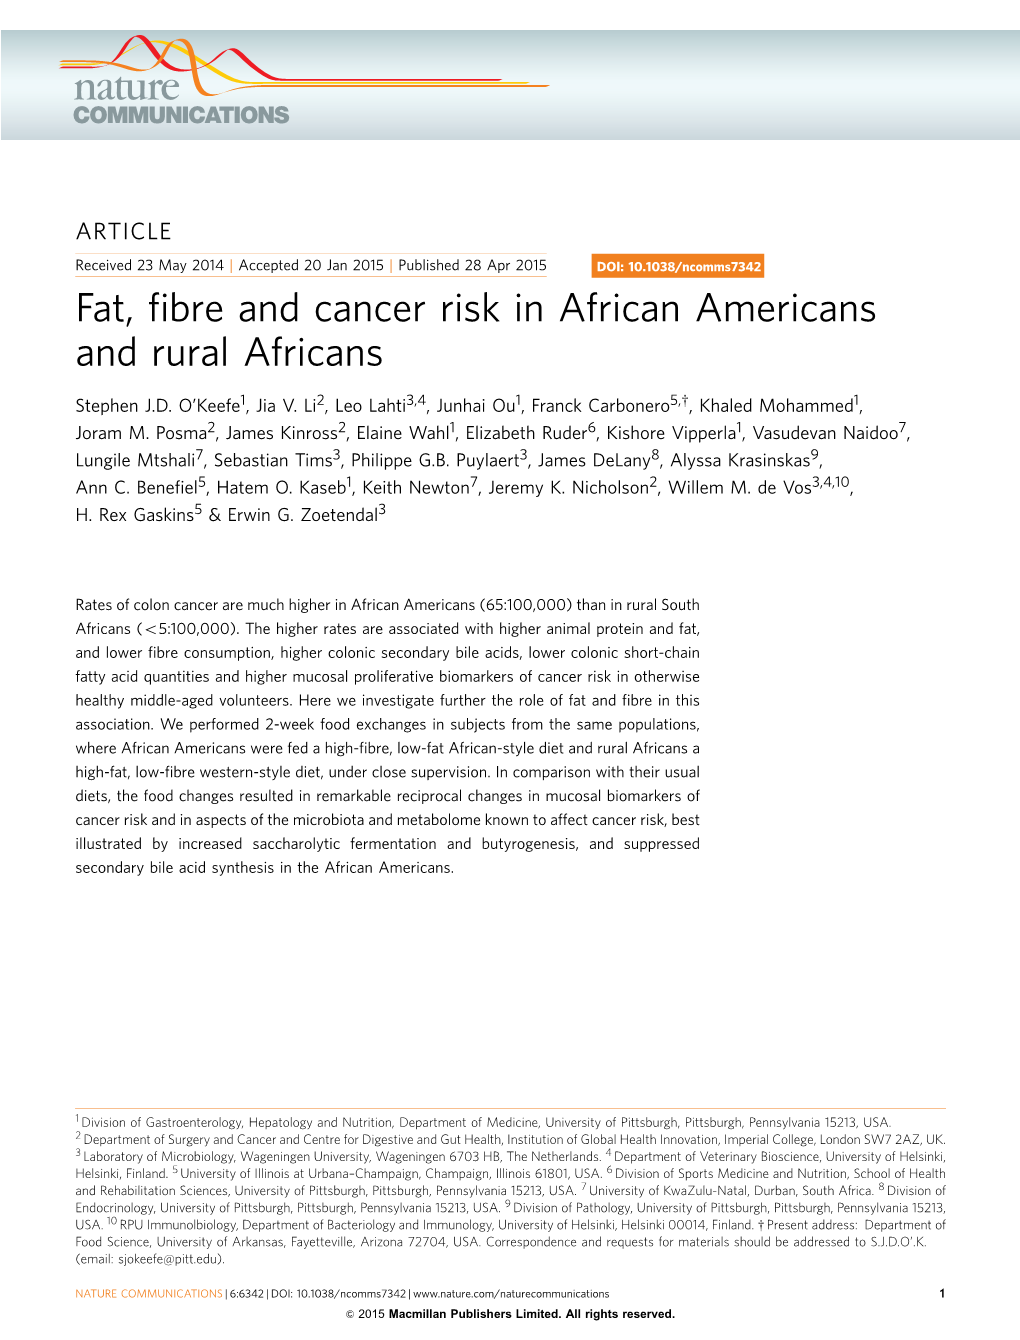 Fat, Fibre and Cancer Risk in African Americans and Rural Africans